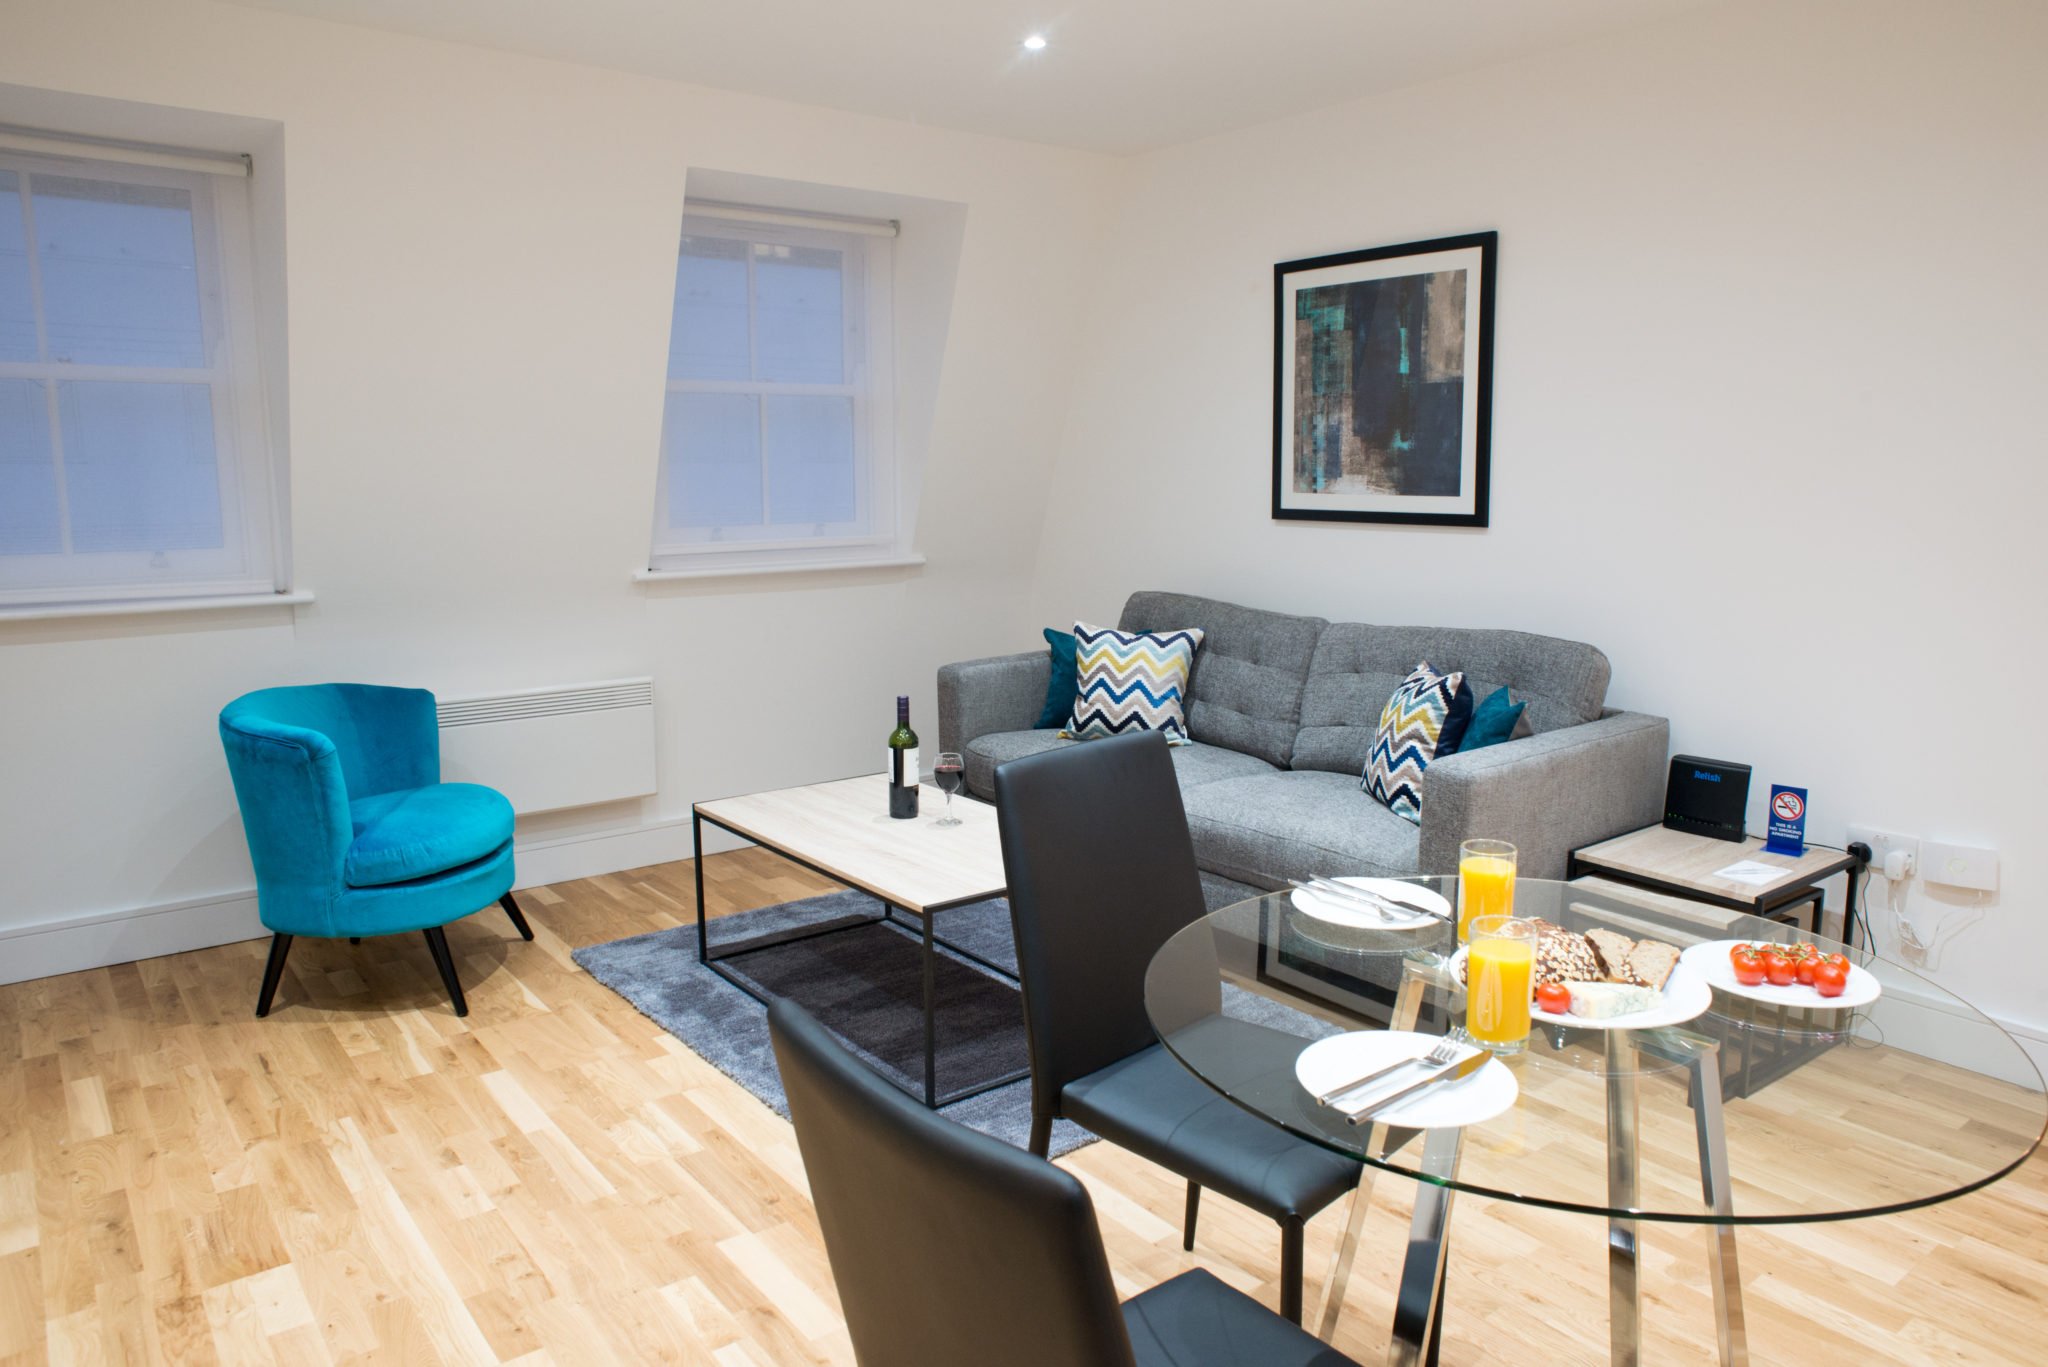 Serviced-Islington-Accommodation-East-London|-Stylish-&-cheap-Old-Street-Apartments-|-Free-Wi-Fi|-Fully-Equipped-Kitchen-|-Private-Balcony-|-0208-6913920|-Urban-Stay